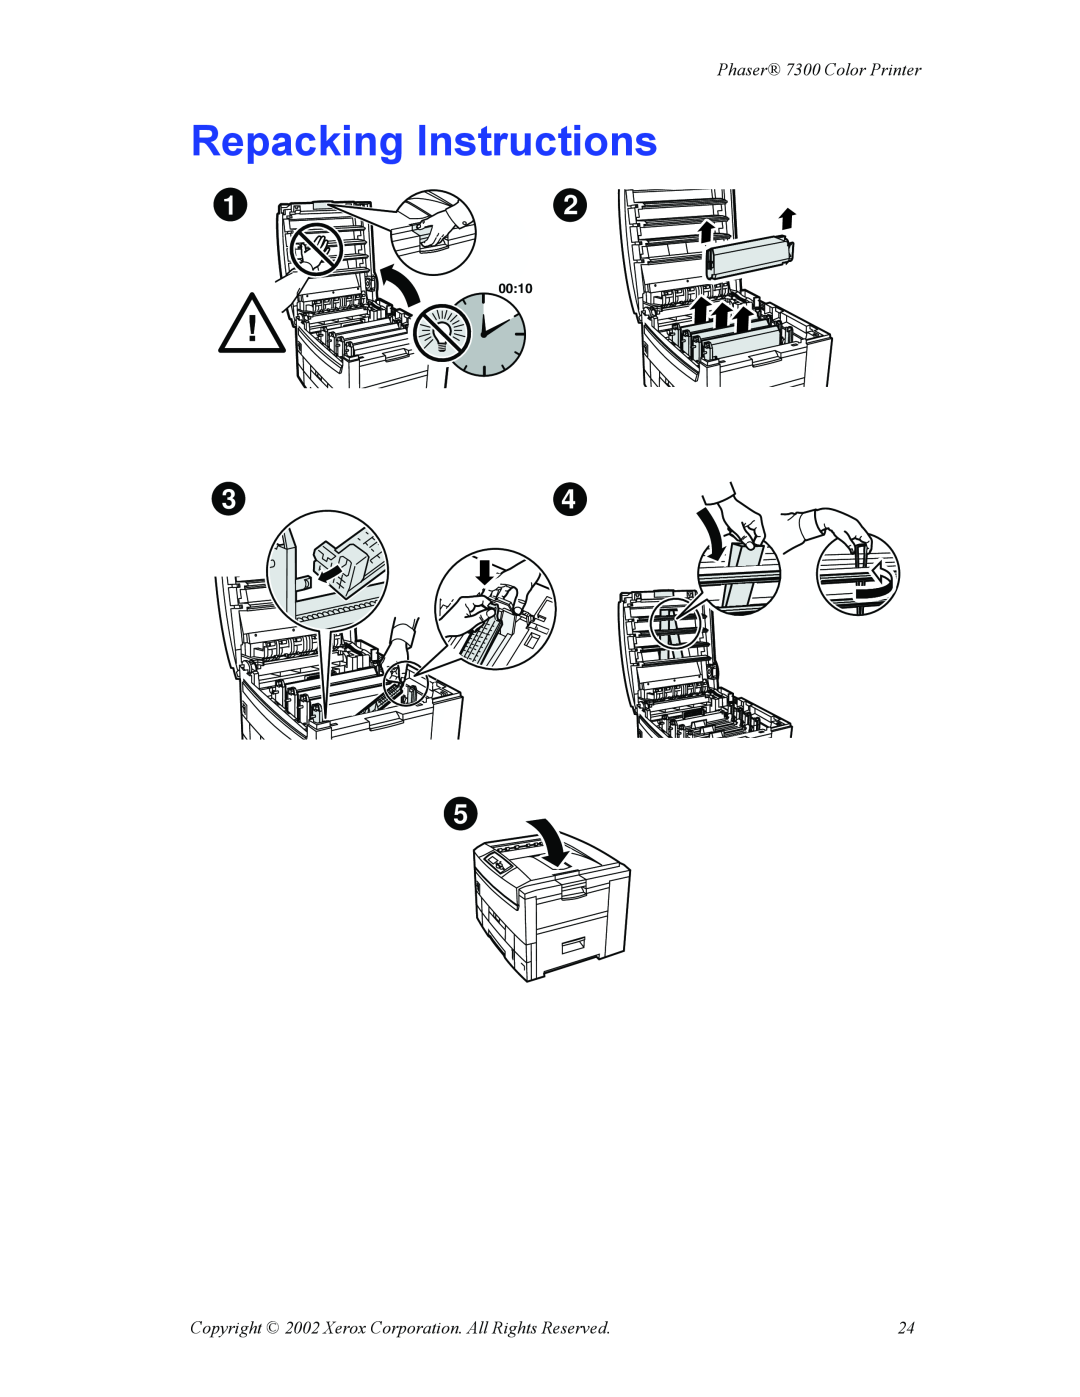 Xerox Repacking Instructions, Phaser 7300 Color Printer, Copyright 2002 Xerox Corporation. All Rights Reserved, 0010 